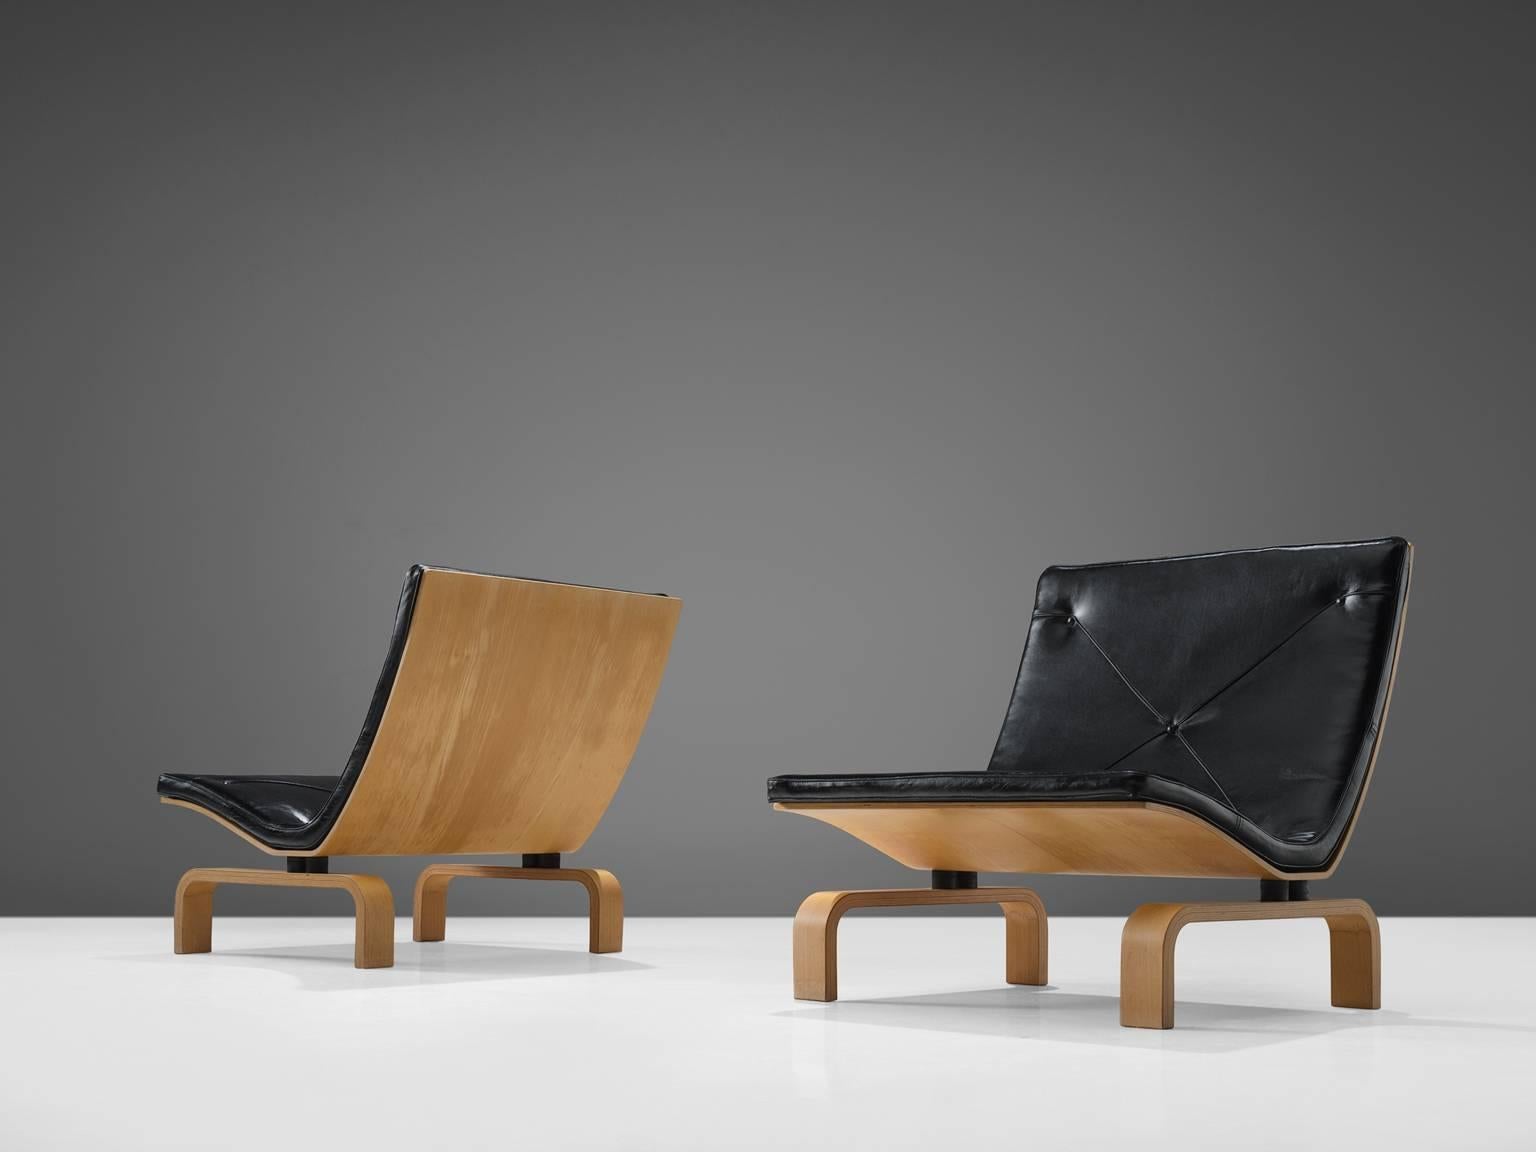 Poul Kjærholm for E. Kold Christensen, PK-27 easy chairs, maple and black leather, Denmark, design 1971, later production.

This set of chairs designed by Kjærholm is made from moulded laminated maple and black leather. The chairs have a seat that